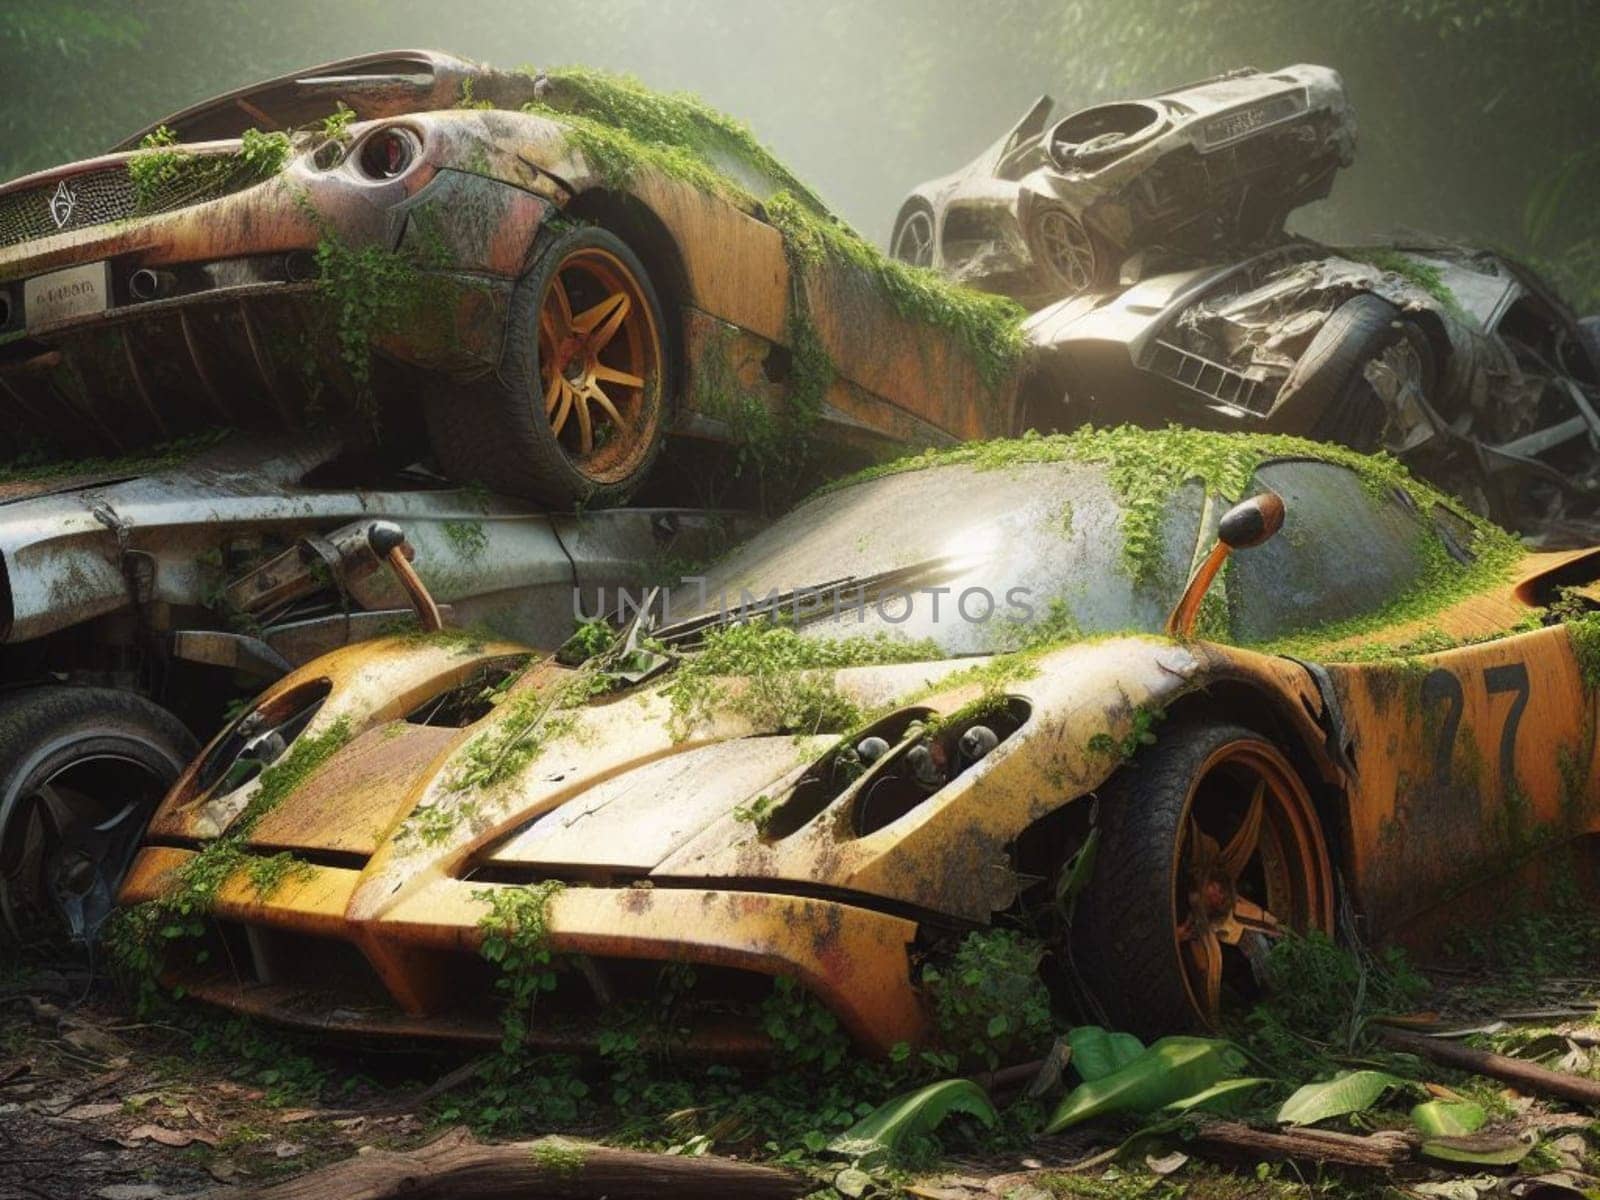 Abandoned rusty petrol super car banned for co2 emission agenda, overgrowth plants bloom flowers by verbano